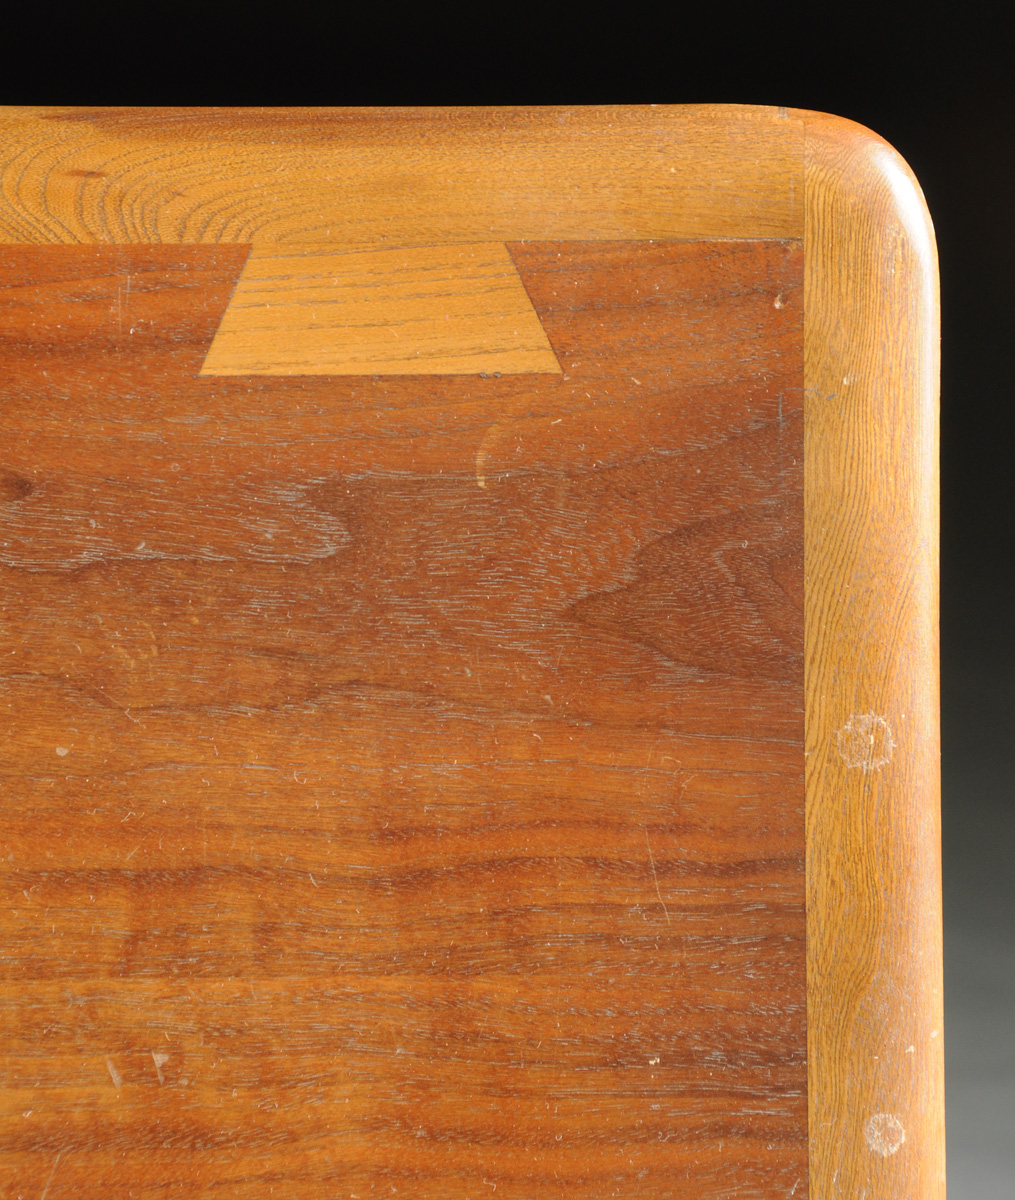 ANDRE BUS (American 20th Century) A WALNUT AND OAK END TABLE, "ACCLAIM" MODEL 900-92, FOR LANE, ALTA - Image 10 of 10